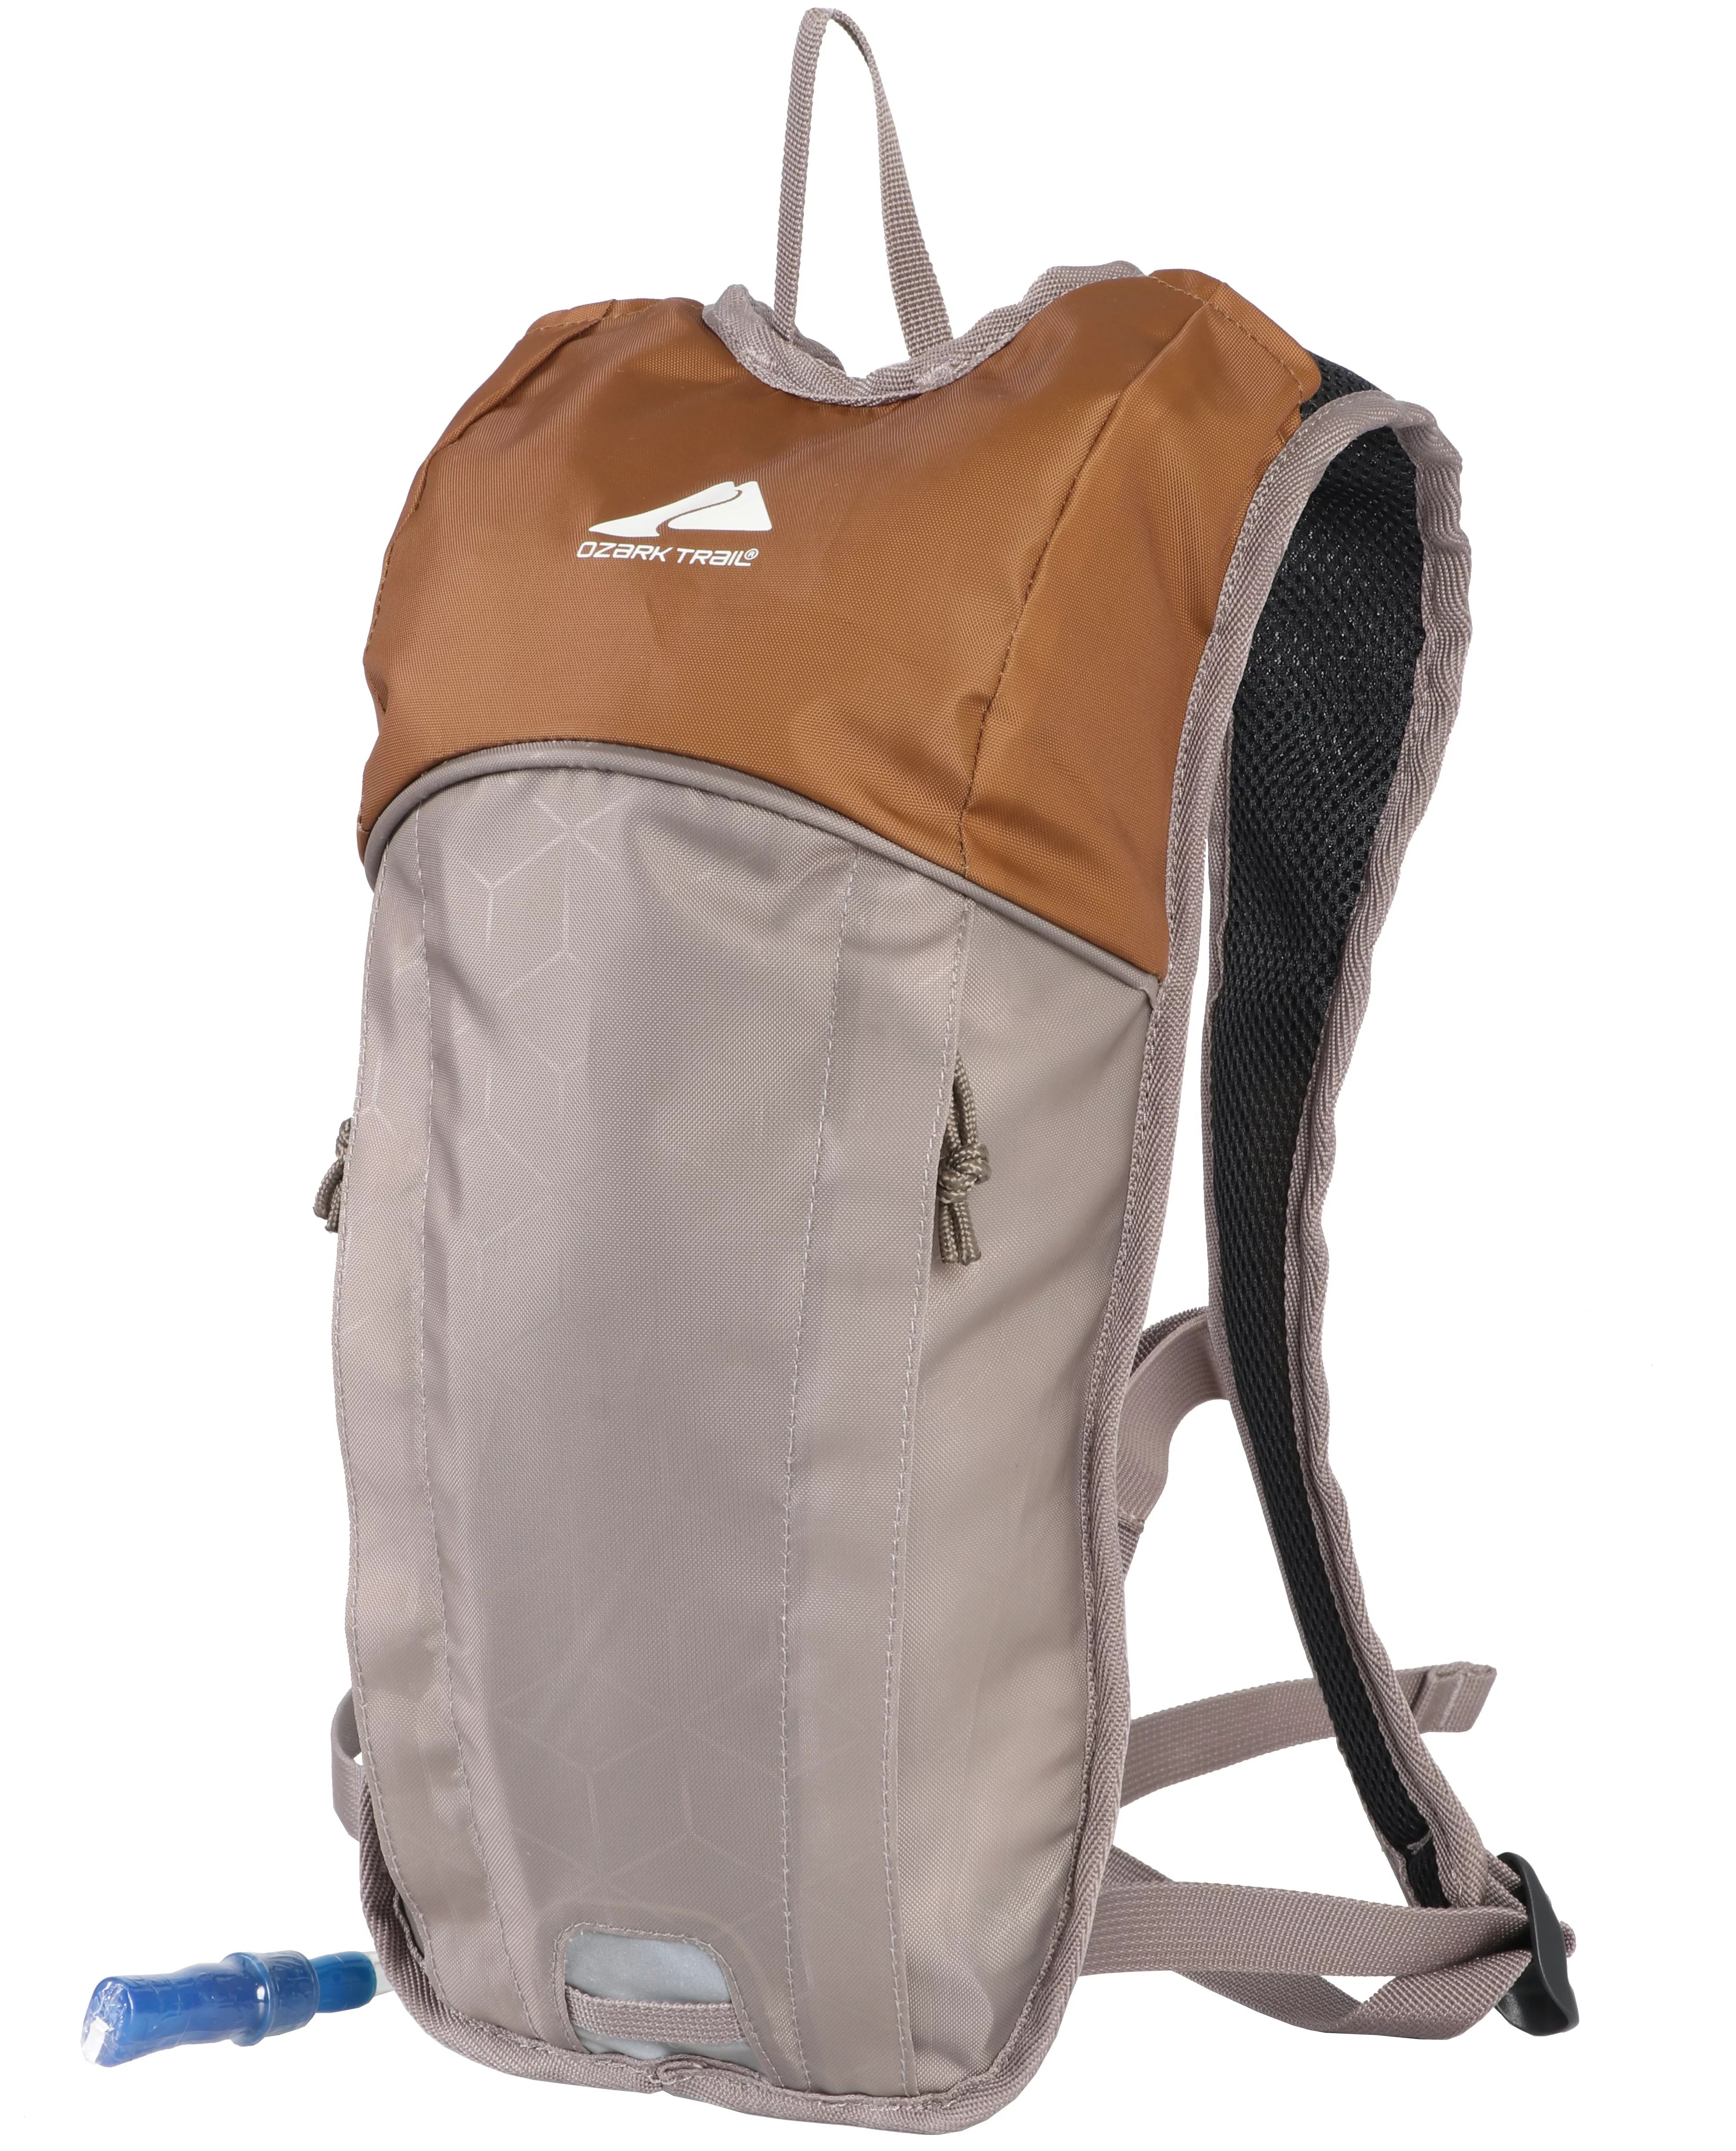 Ozark Trail Small 2 Liter Hiking Hydration Backpack with Included Water Reservoir, Tan | Walmart (US)